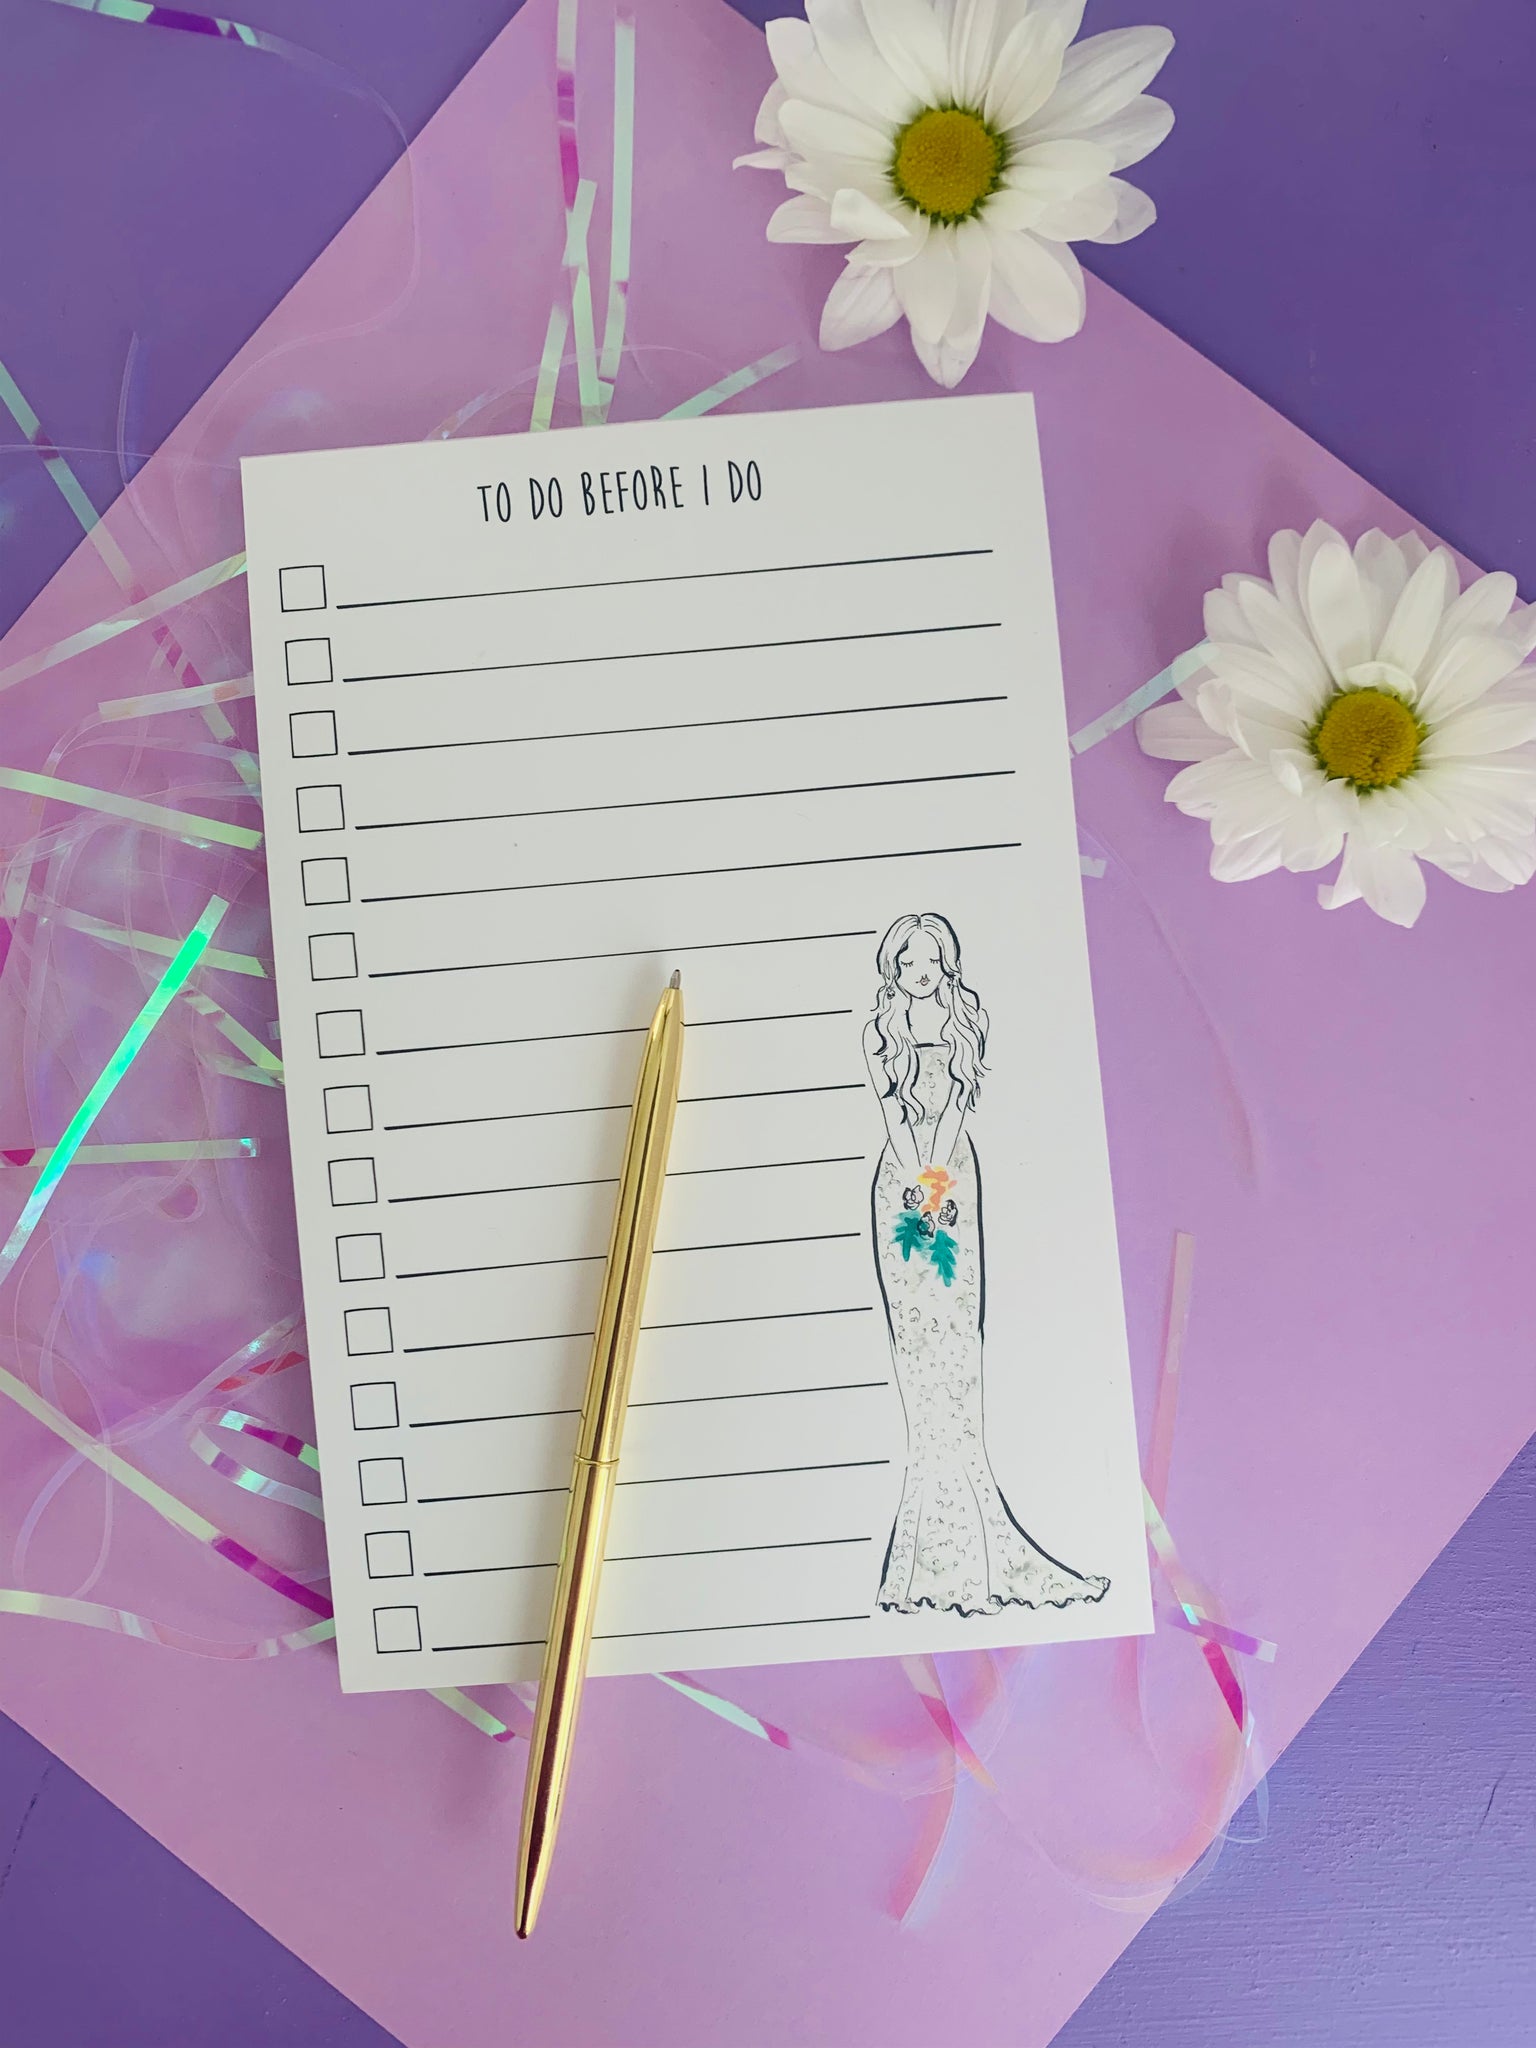 To do before "I do" Note Pad (Ready to Ship)